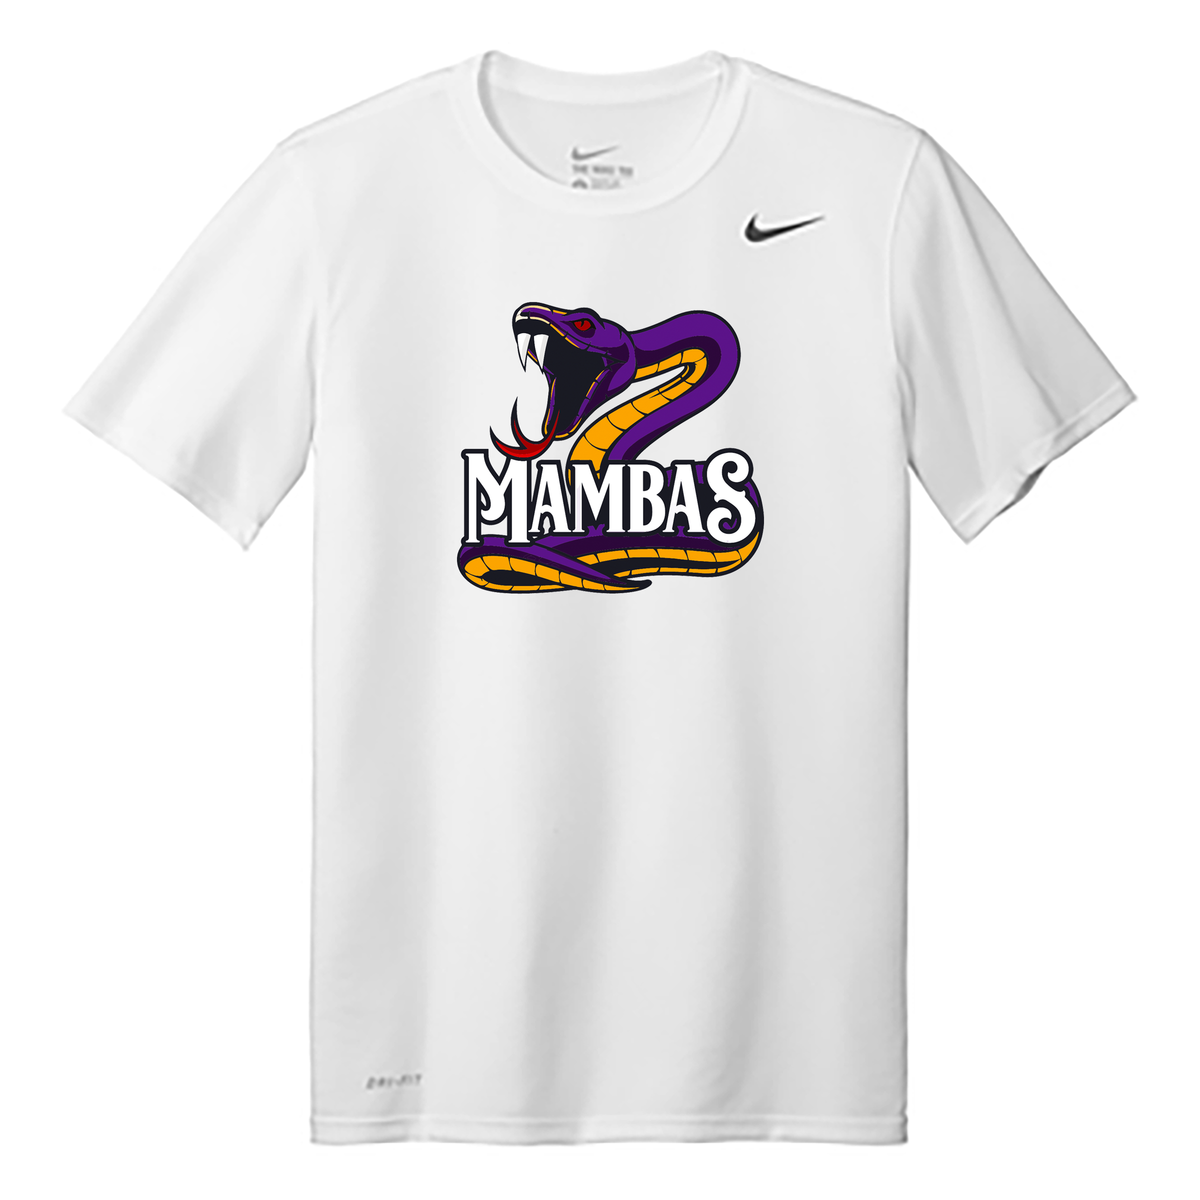 Mambas Basketball Nike rLegend Tee (Available in Youth Sizes)